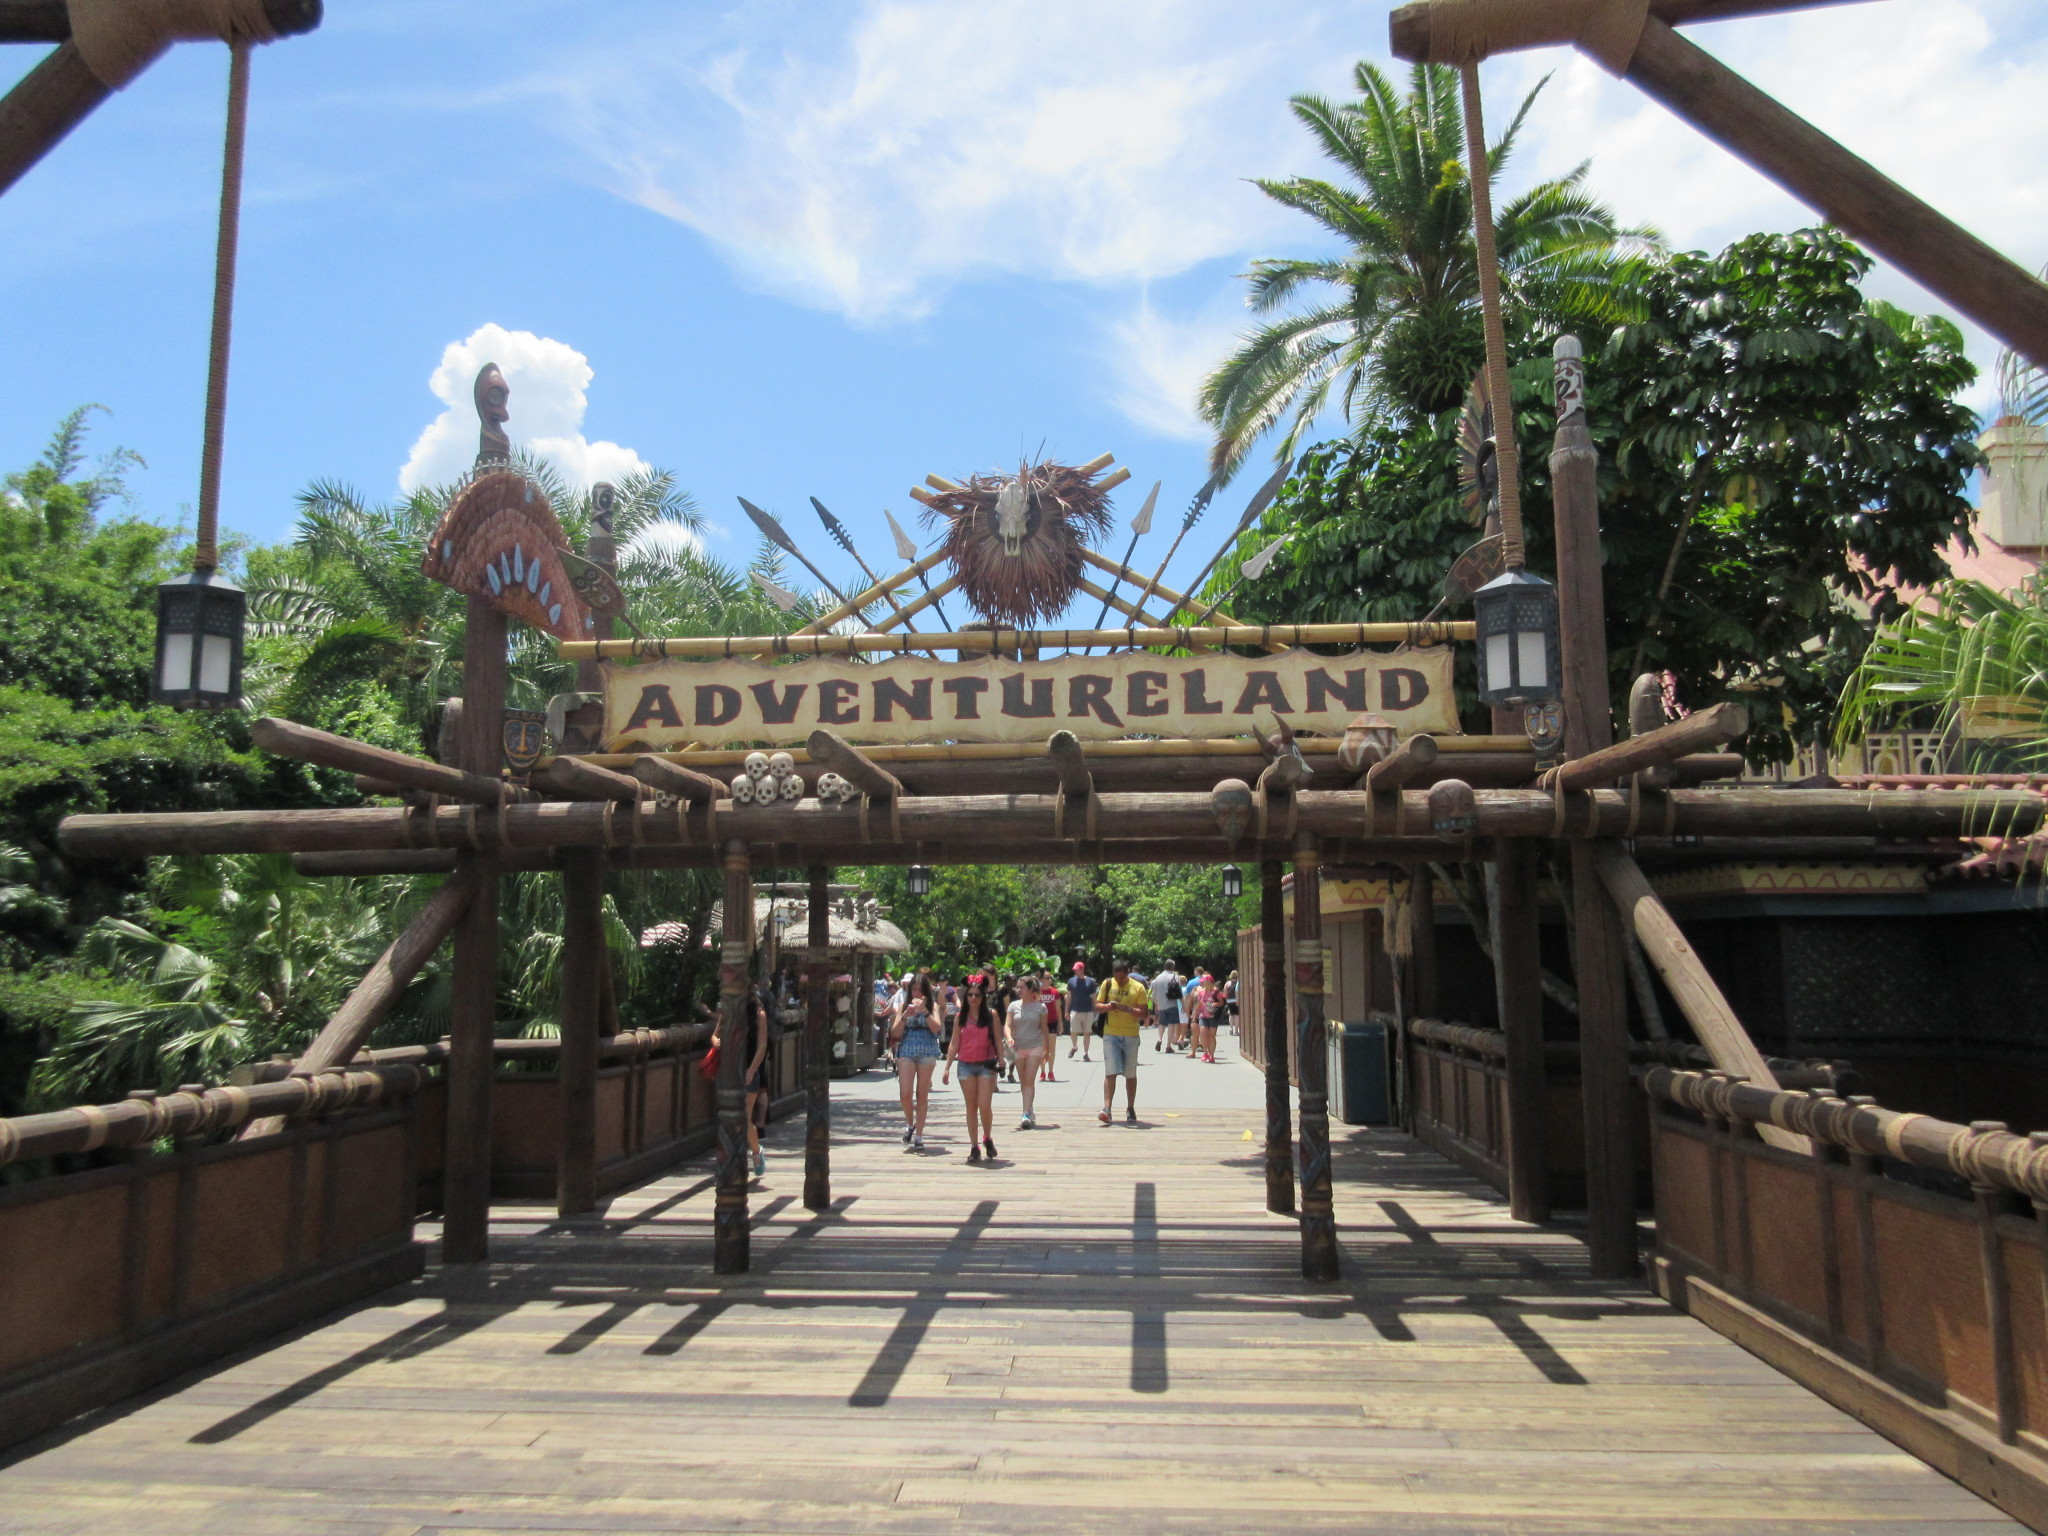 Rumors of a Fourth “Mountain” Coming to Adventureland